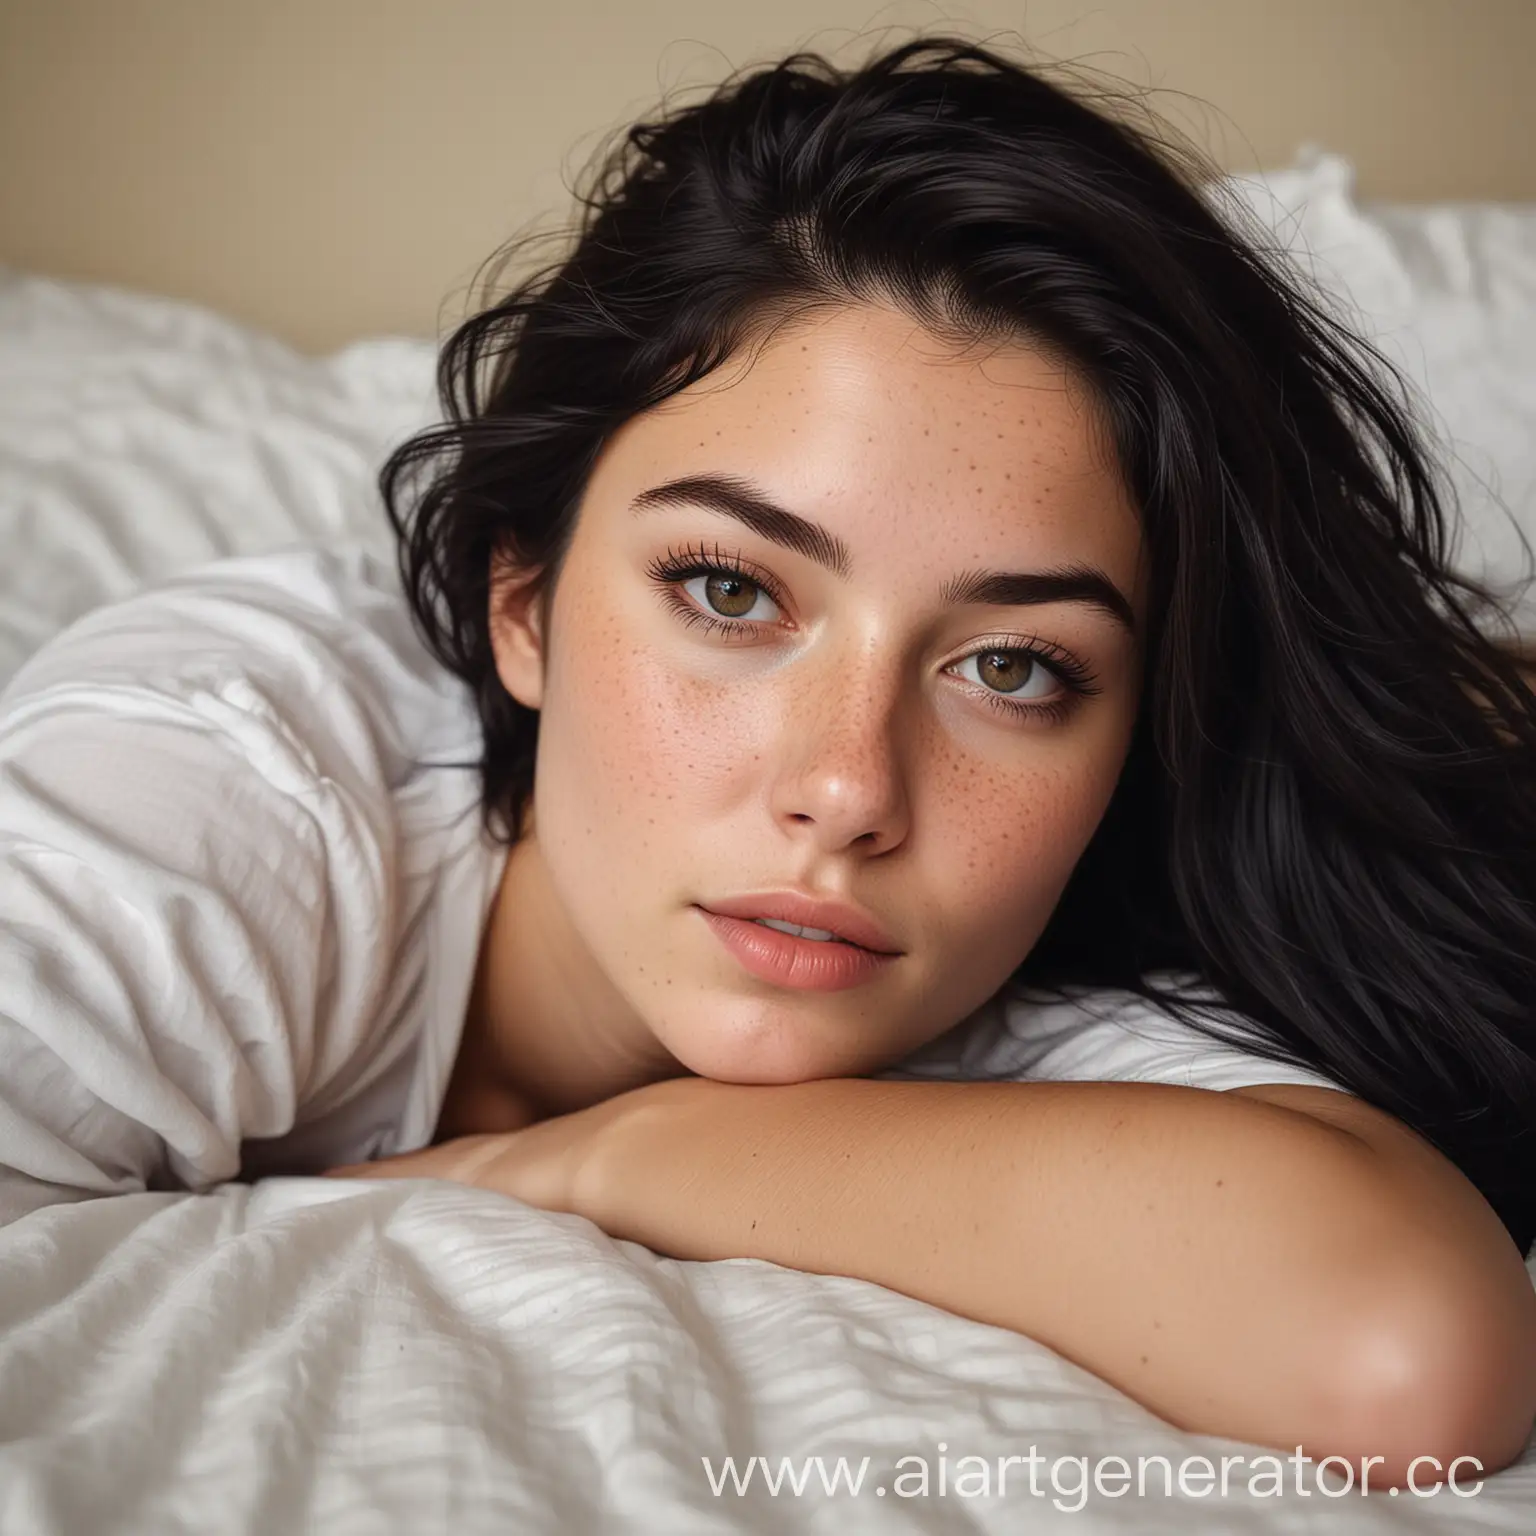 Intimate-Selfie-Portrait-Girl-with-Black-Hair-on-Cozy-Bed